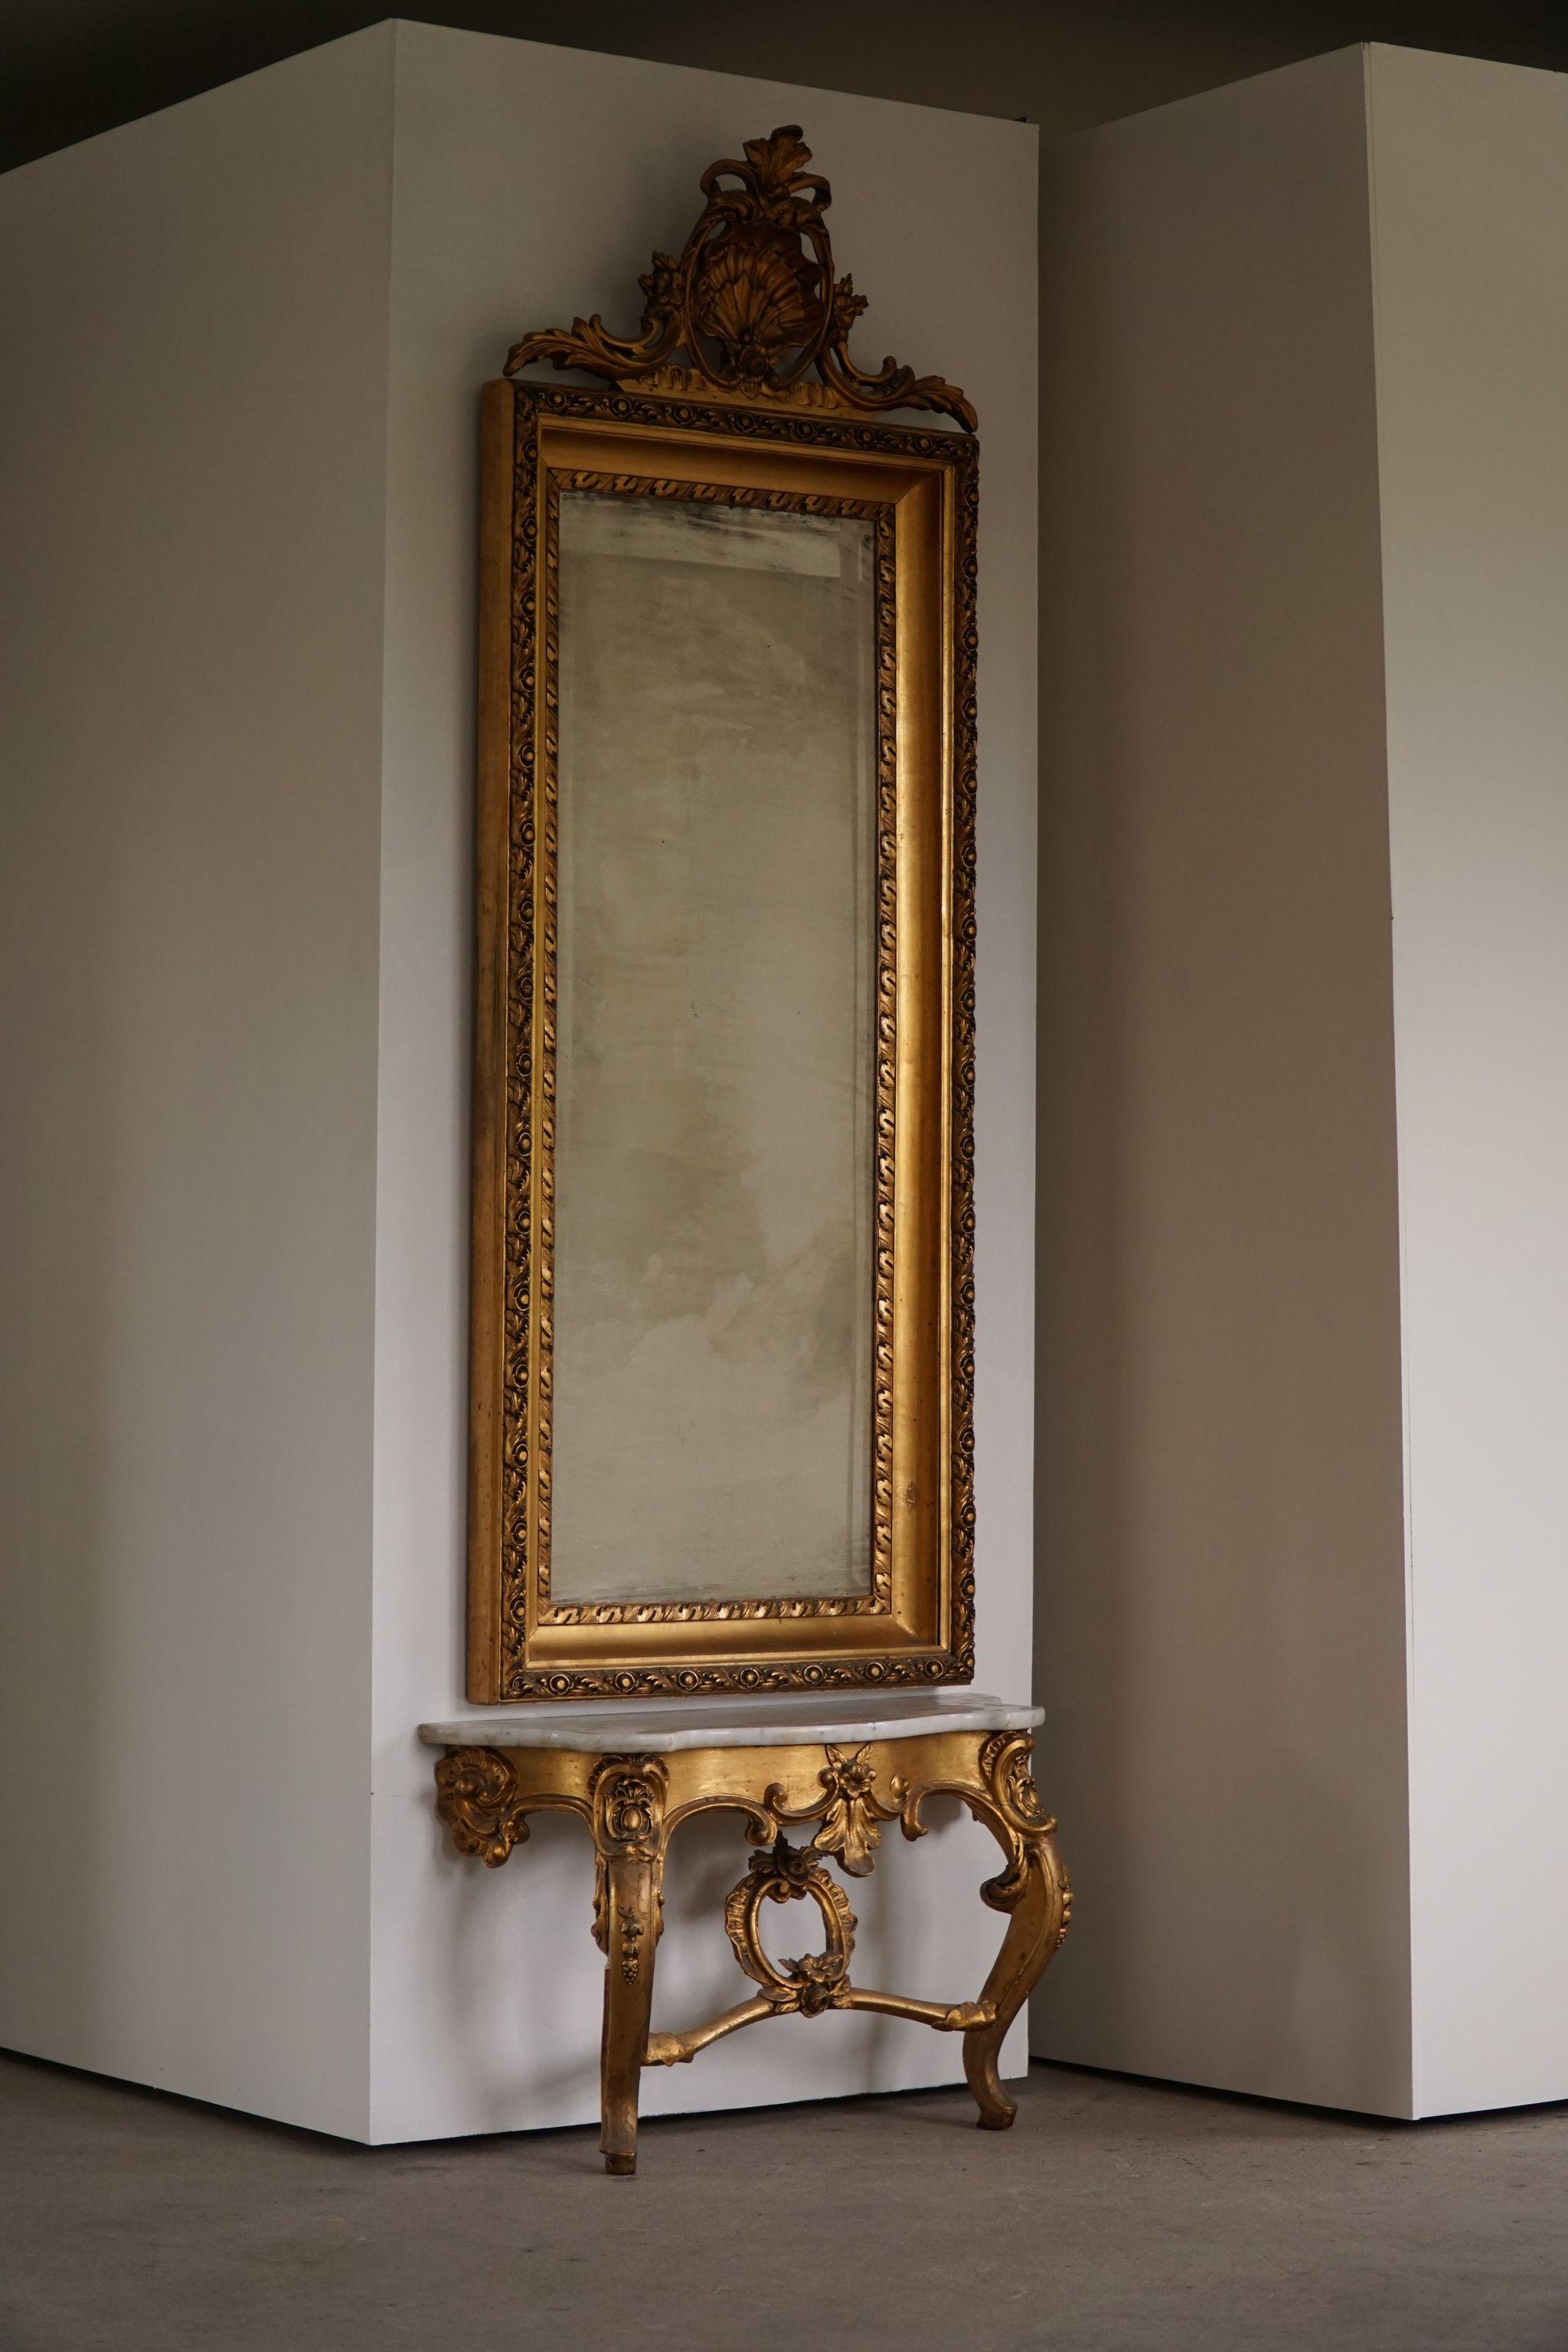 Antique Danish Mid-19th Century Rococo Gold Plated Mirror For Sale 7